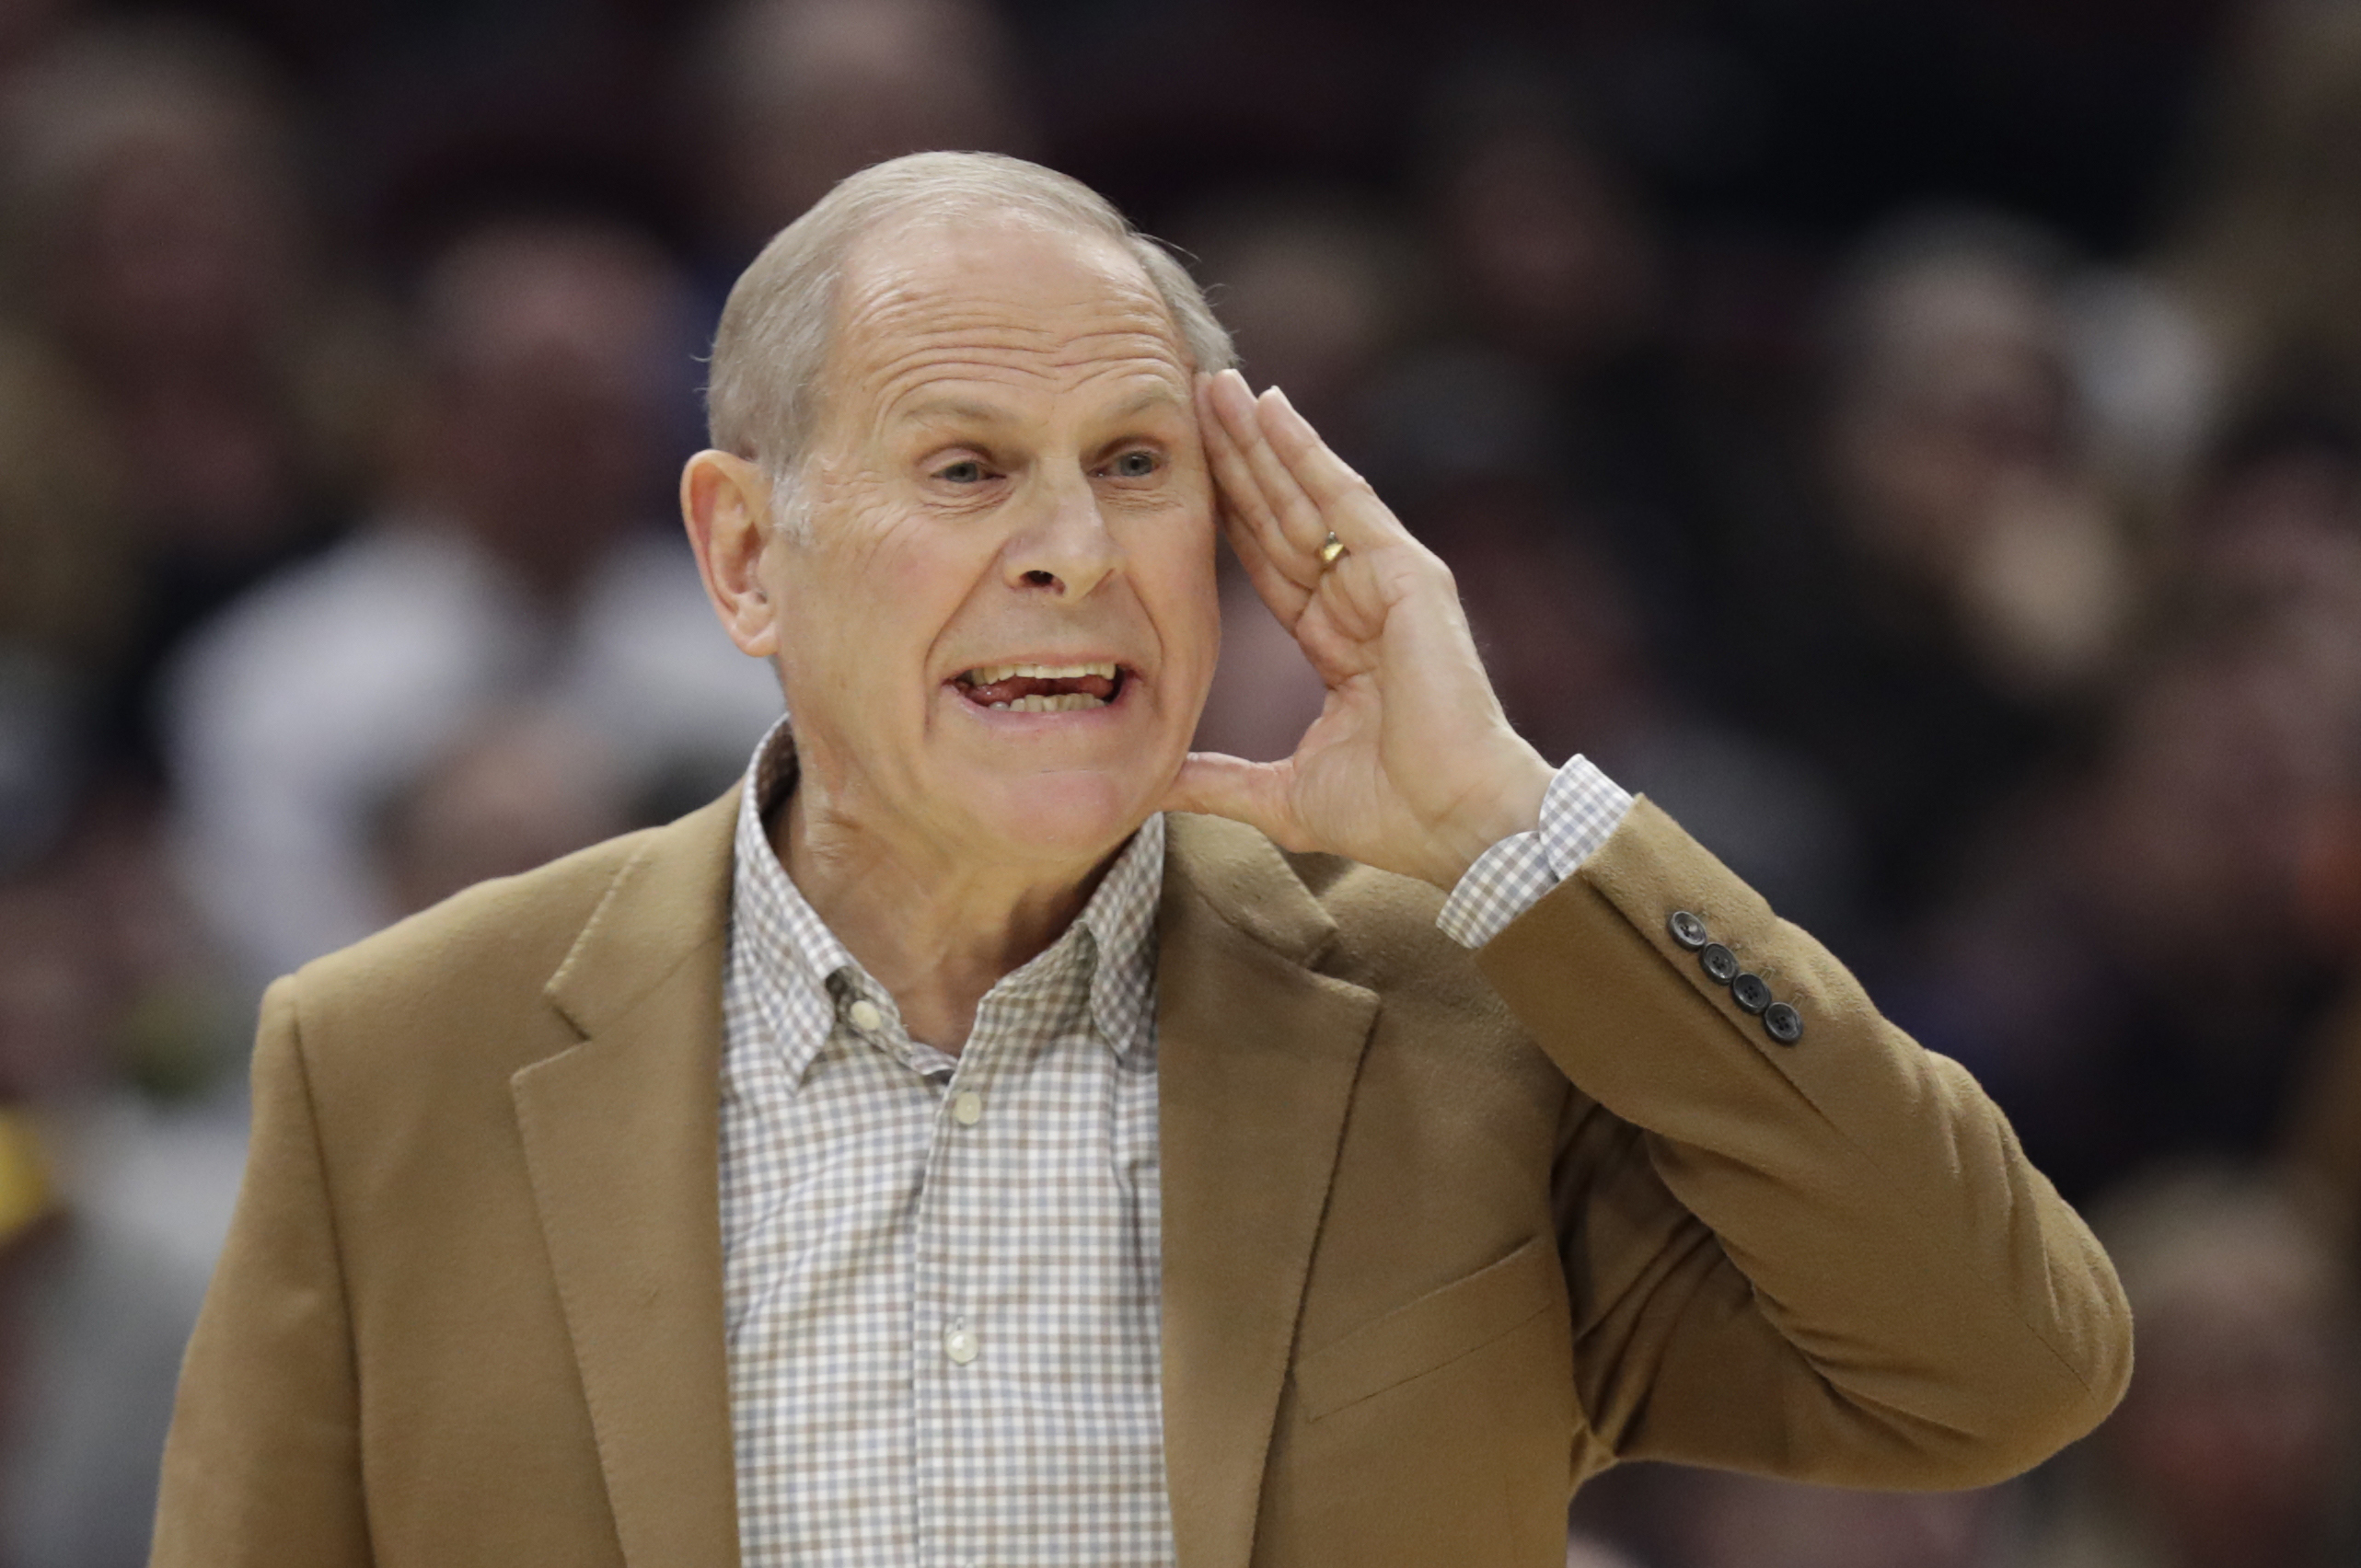 Cavs coach Beilein says he apologized for 'thugs' comment